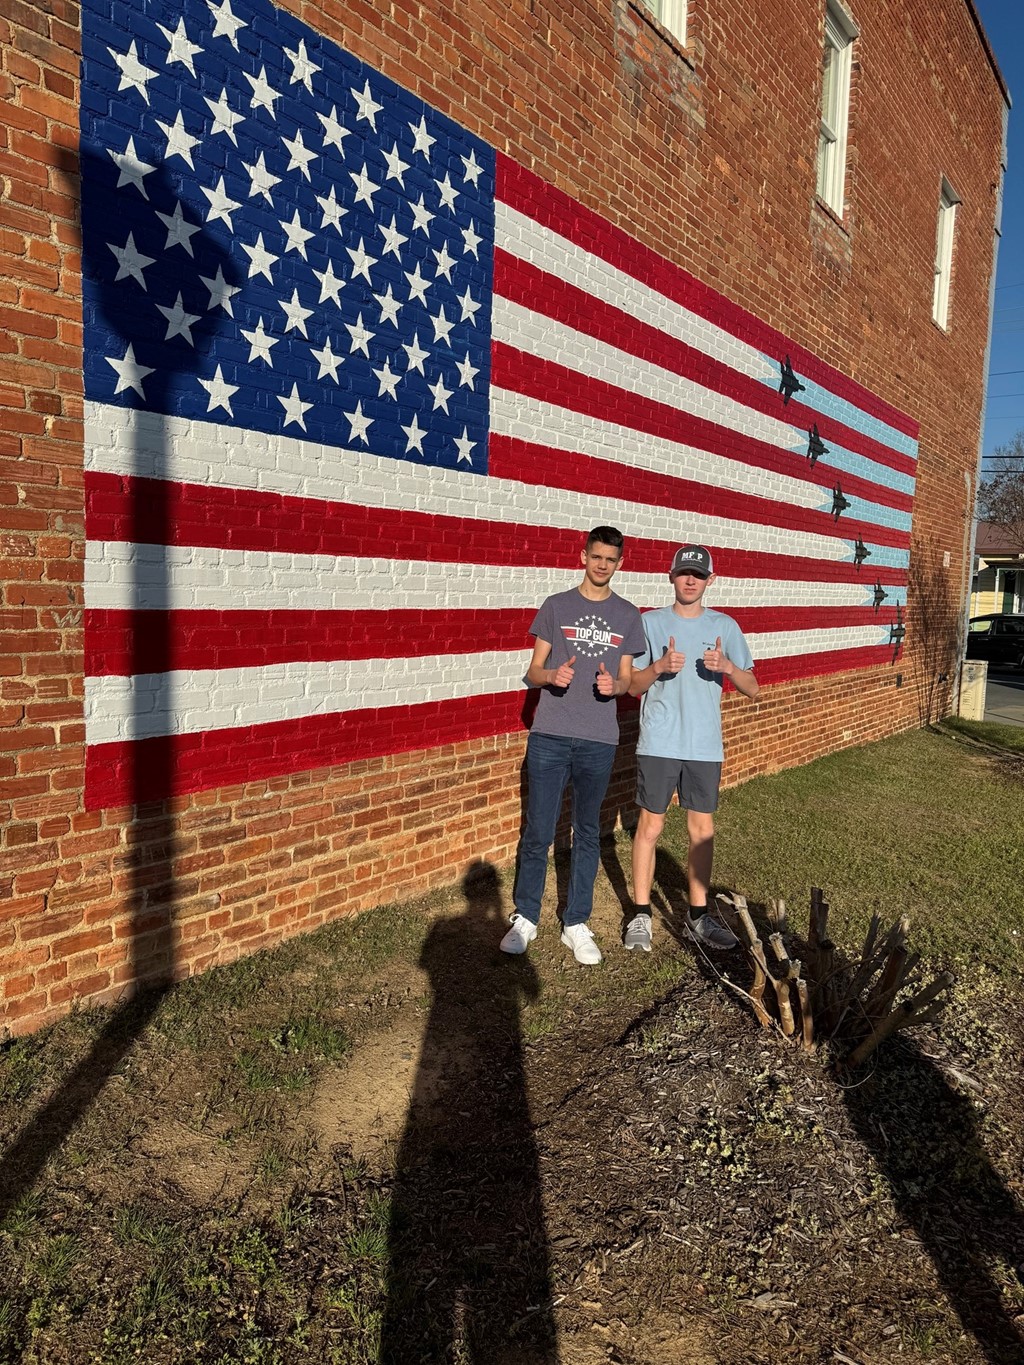 French exchange students standing next to American flag mural